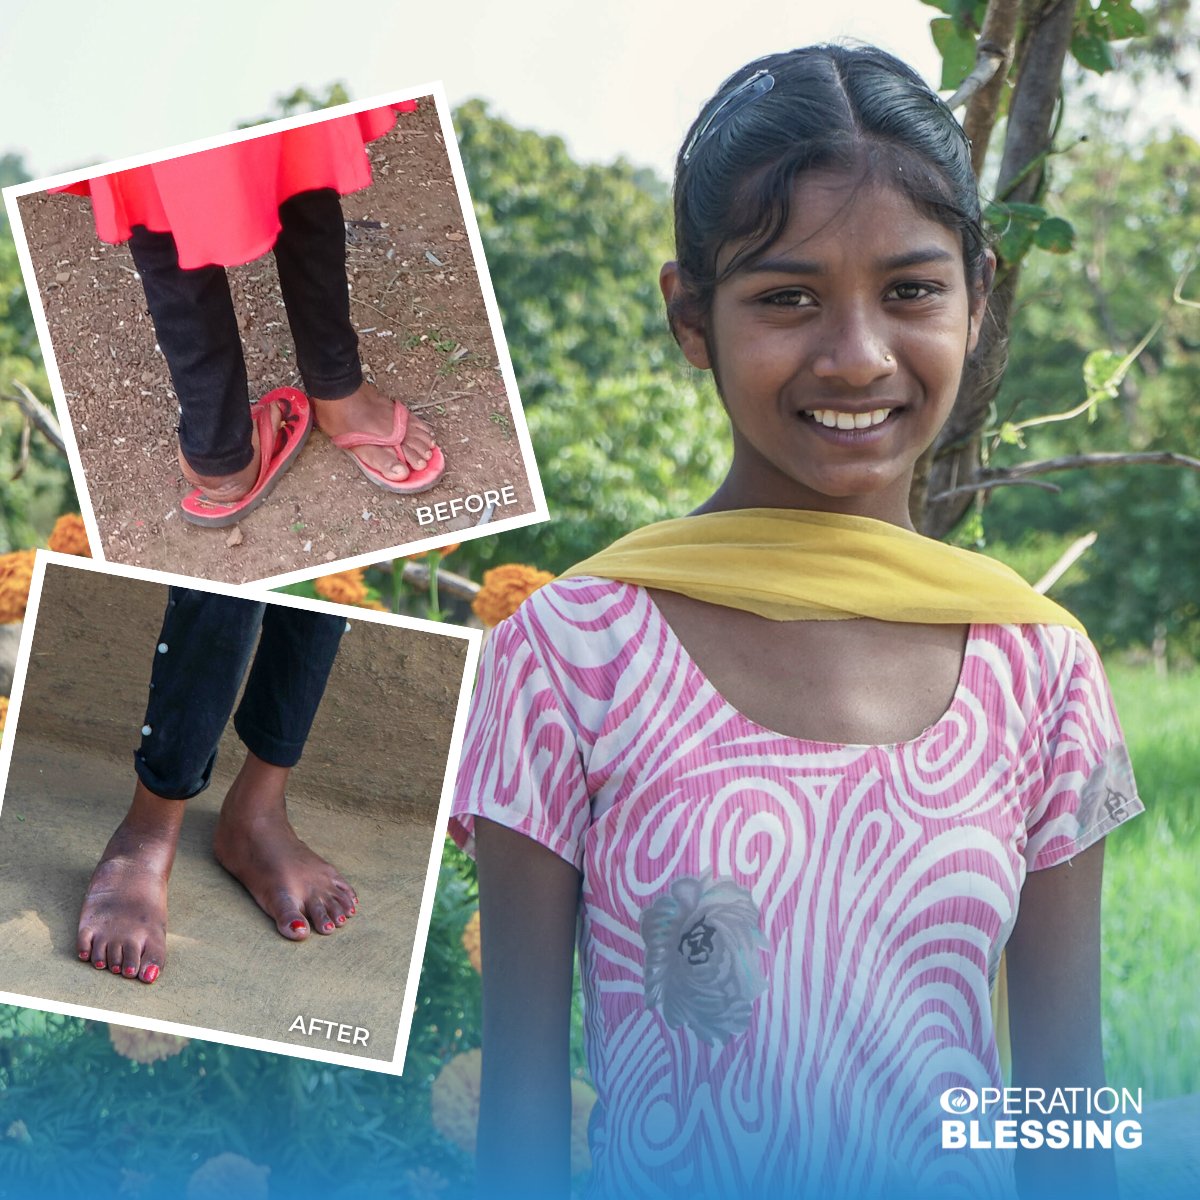 Sonam in India received a #LifeChangingSurgery to repair the severe clubfoot condition she has struggled with since birth! Today, she is 😊 because she is finally able to walk without pain and start pursuing her dream of becoming a #teacher. Thank you!